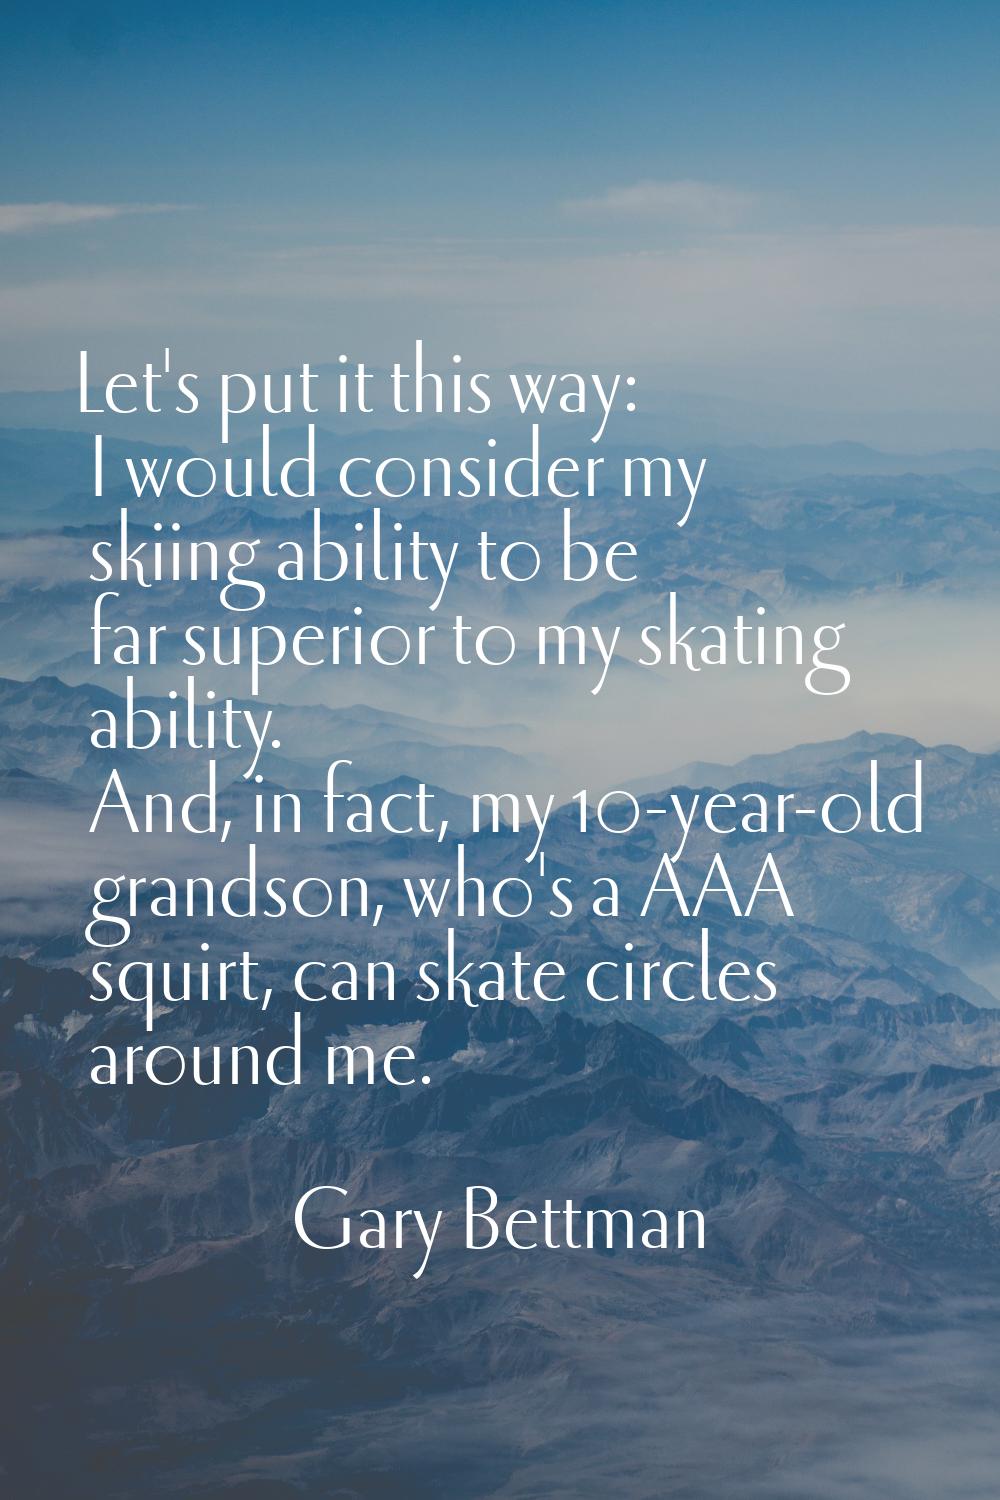 Let's put it this way: I would consider my skiing ability to be far superior to my skating ability.